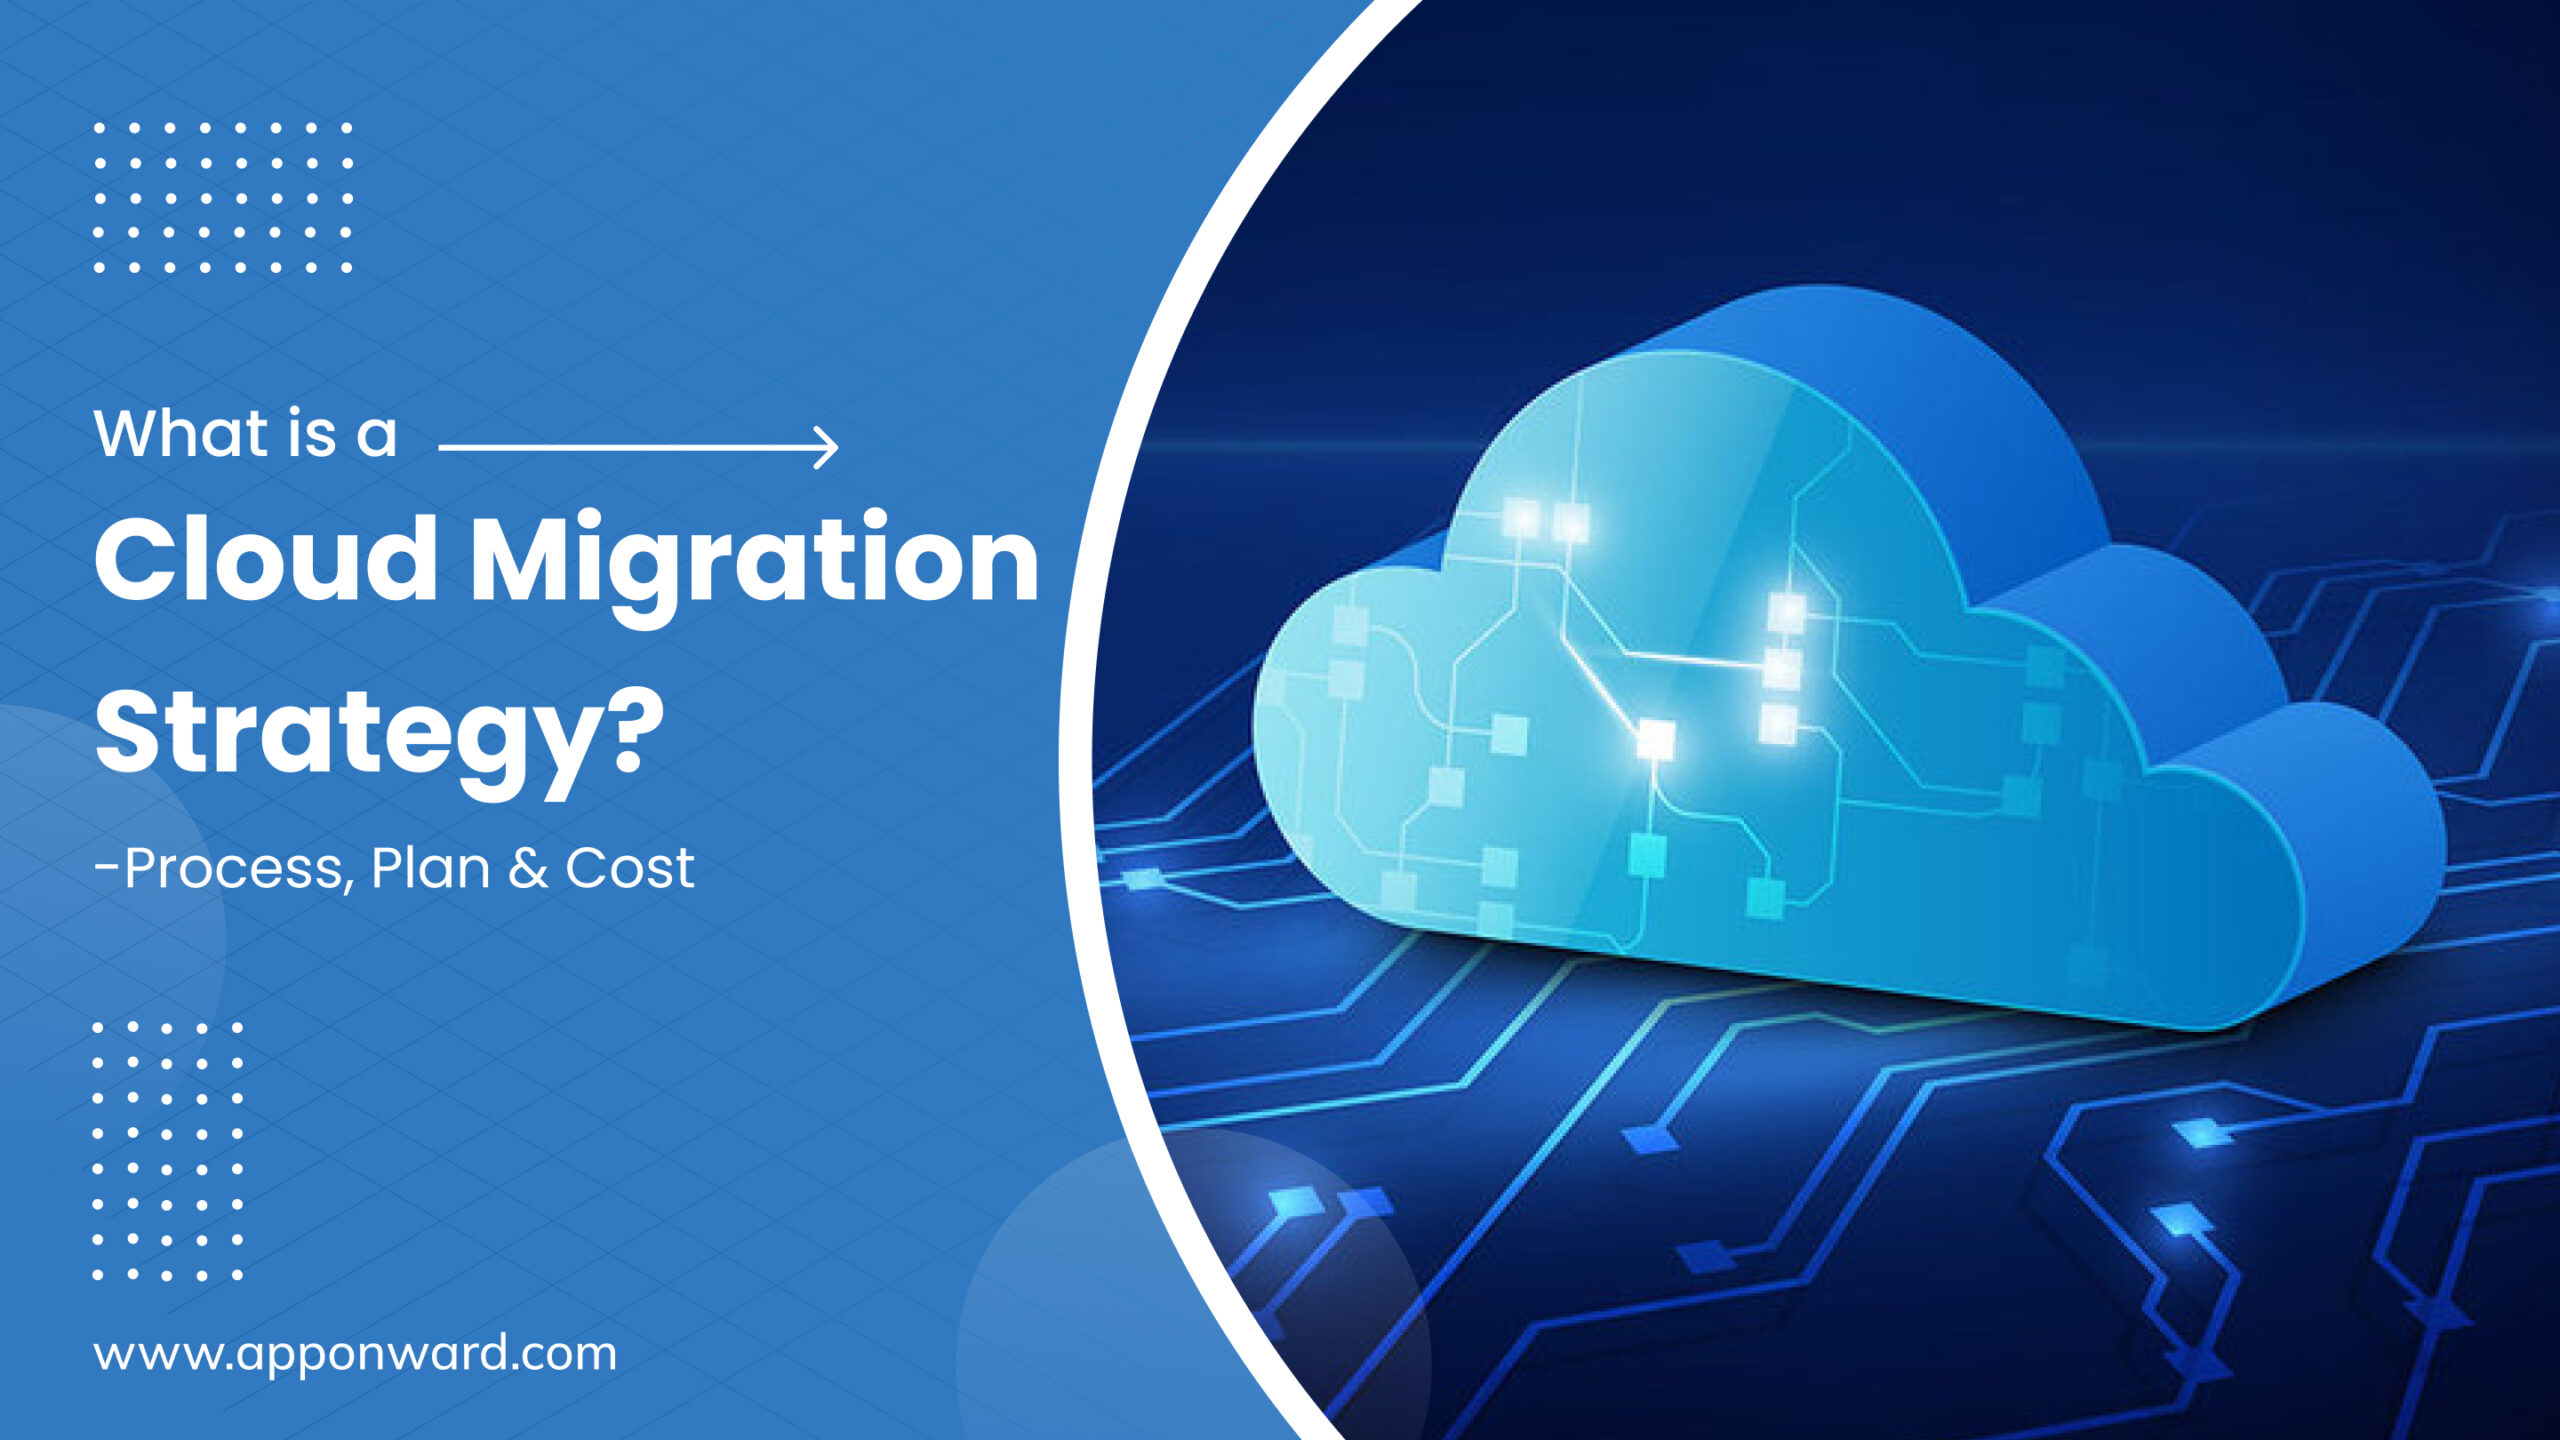 What is a Cloud Migration Strategy? – Process, Plan & Cost